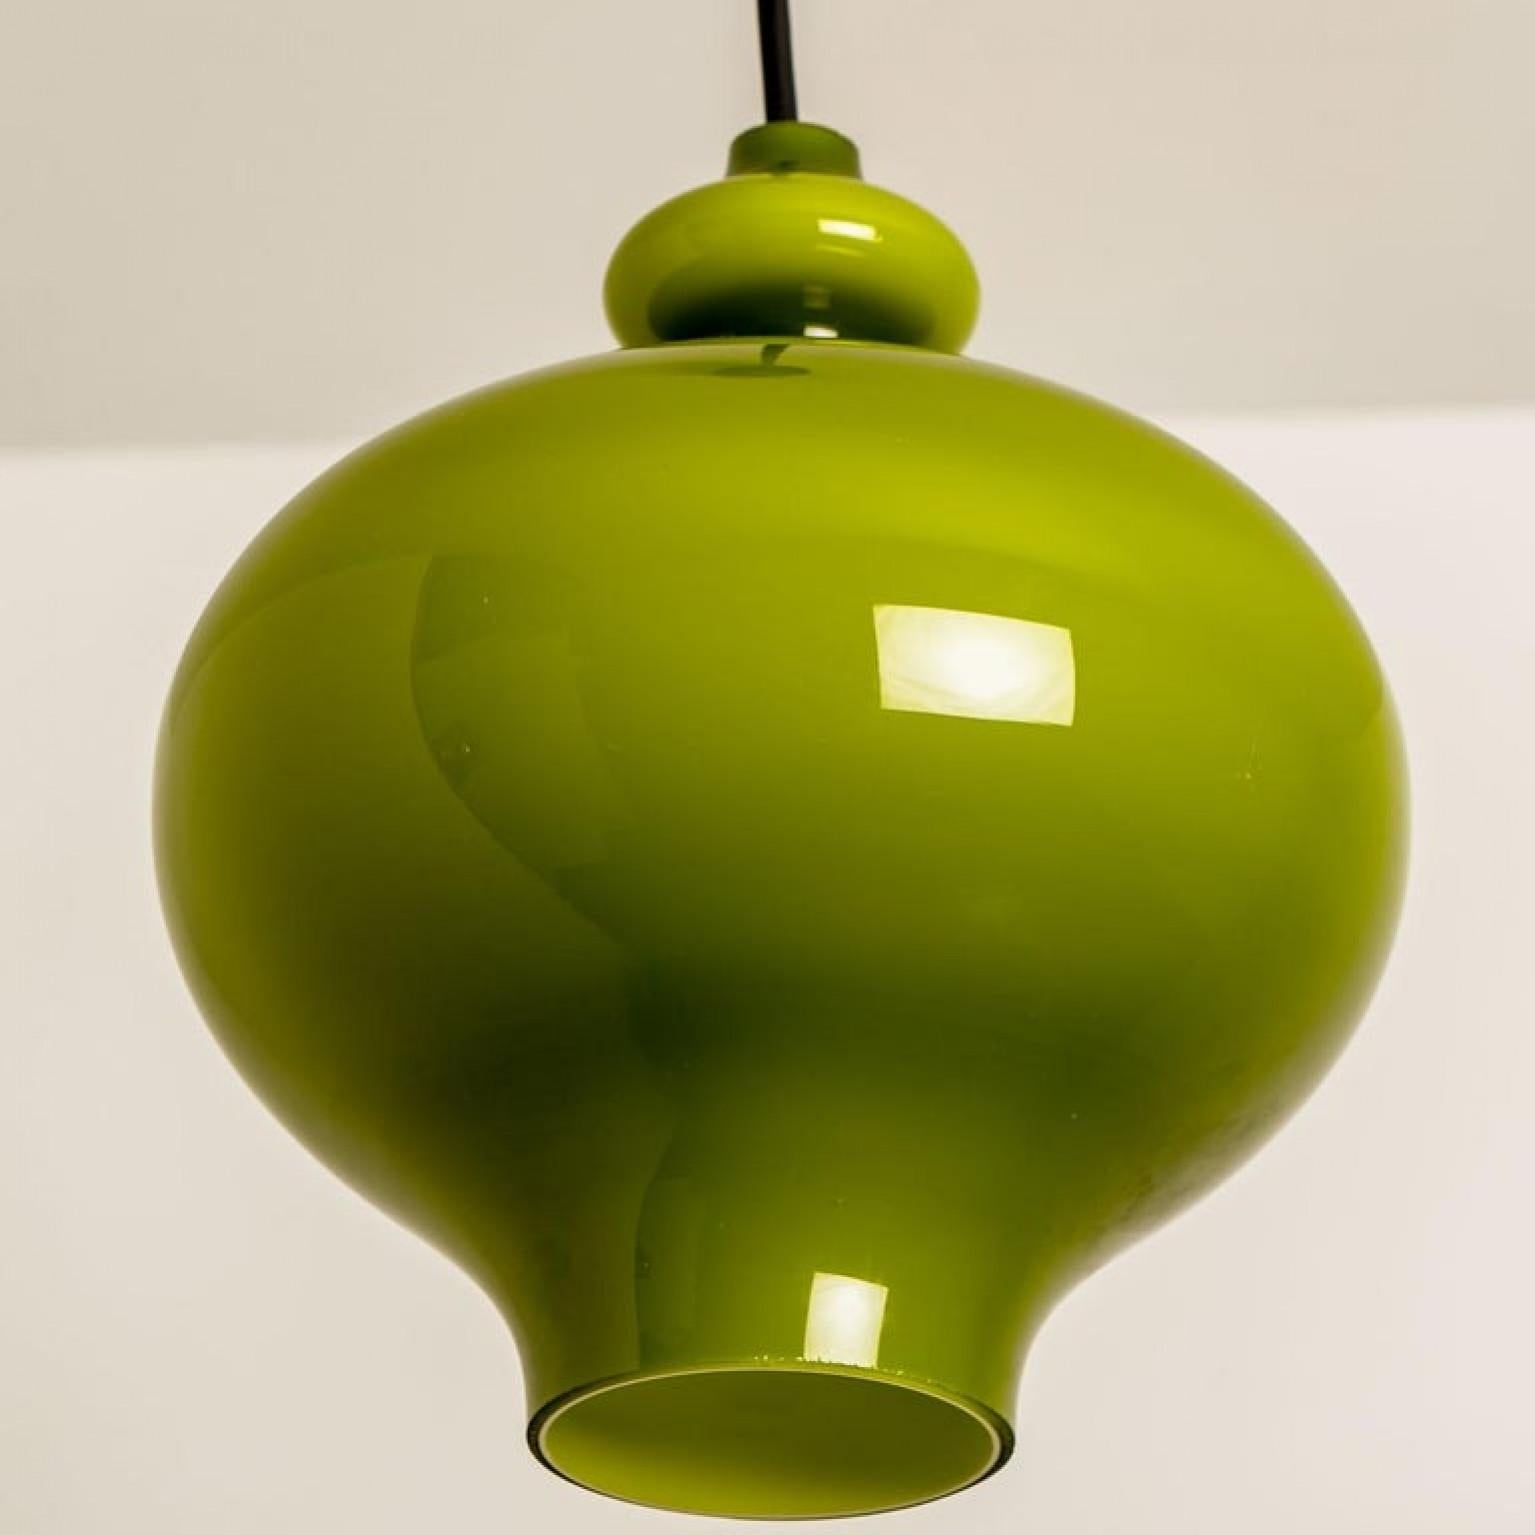 Pair of Hans-Agne Jakobsson for Staff Green Glass Pendant Lights, 1960 For Sale 5